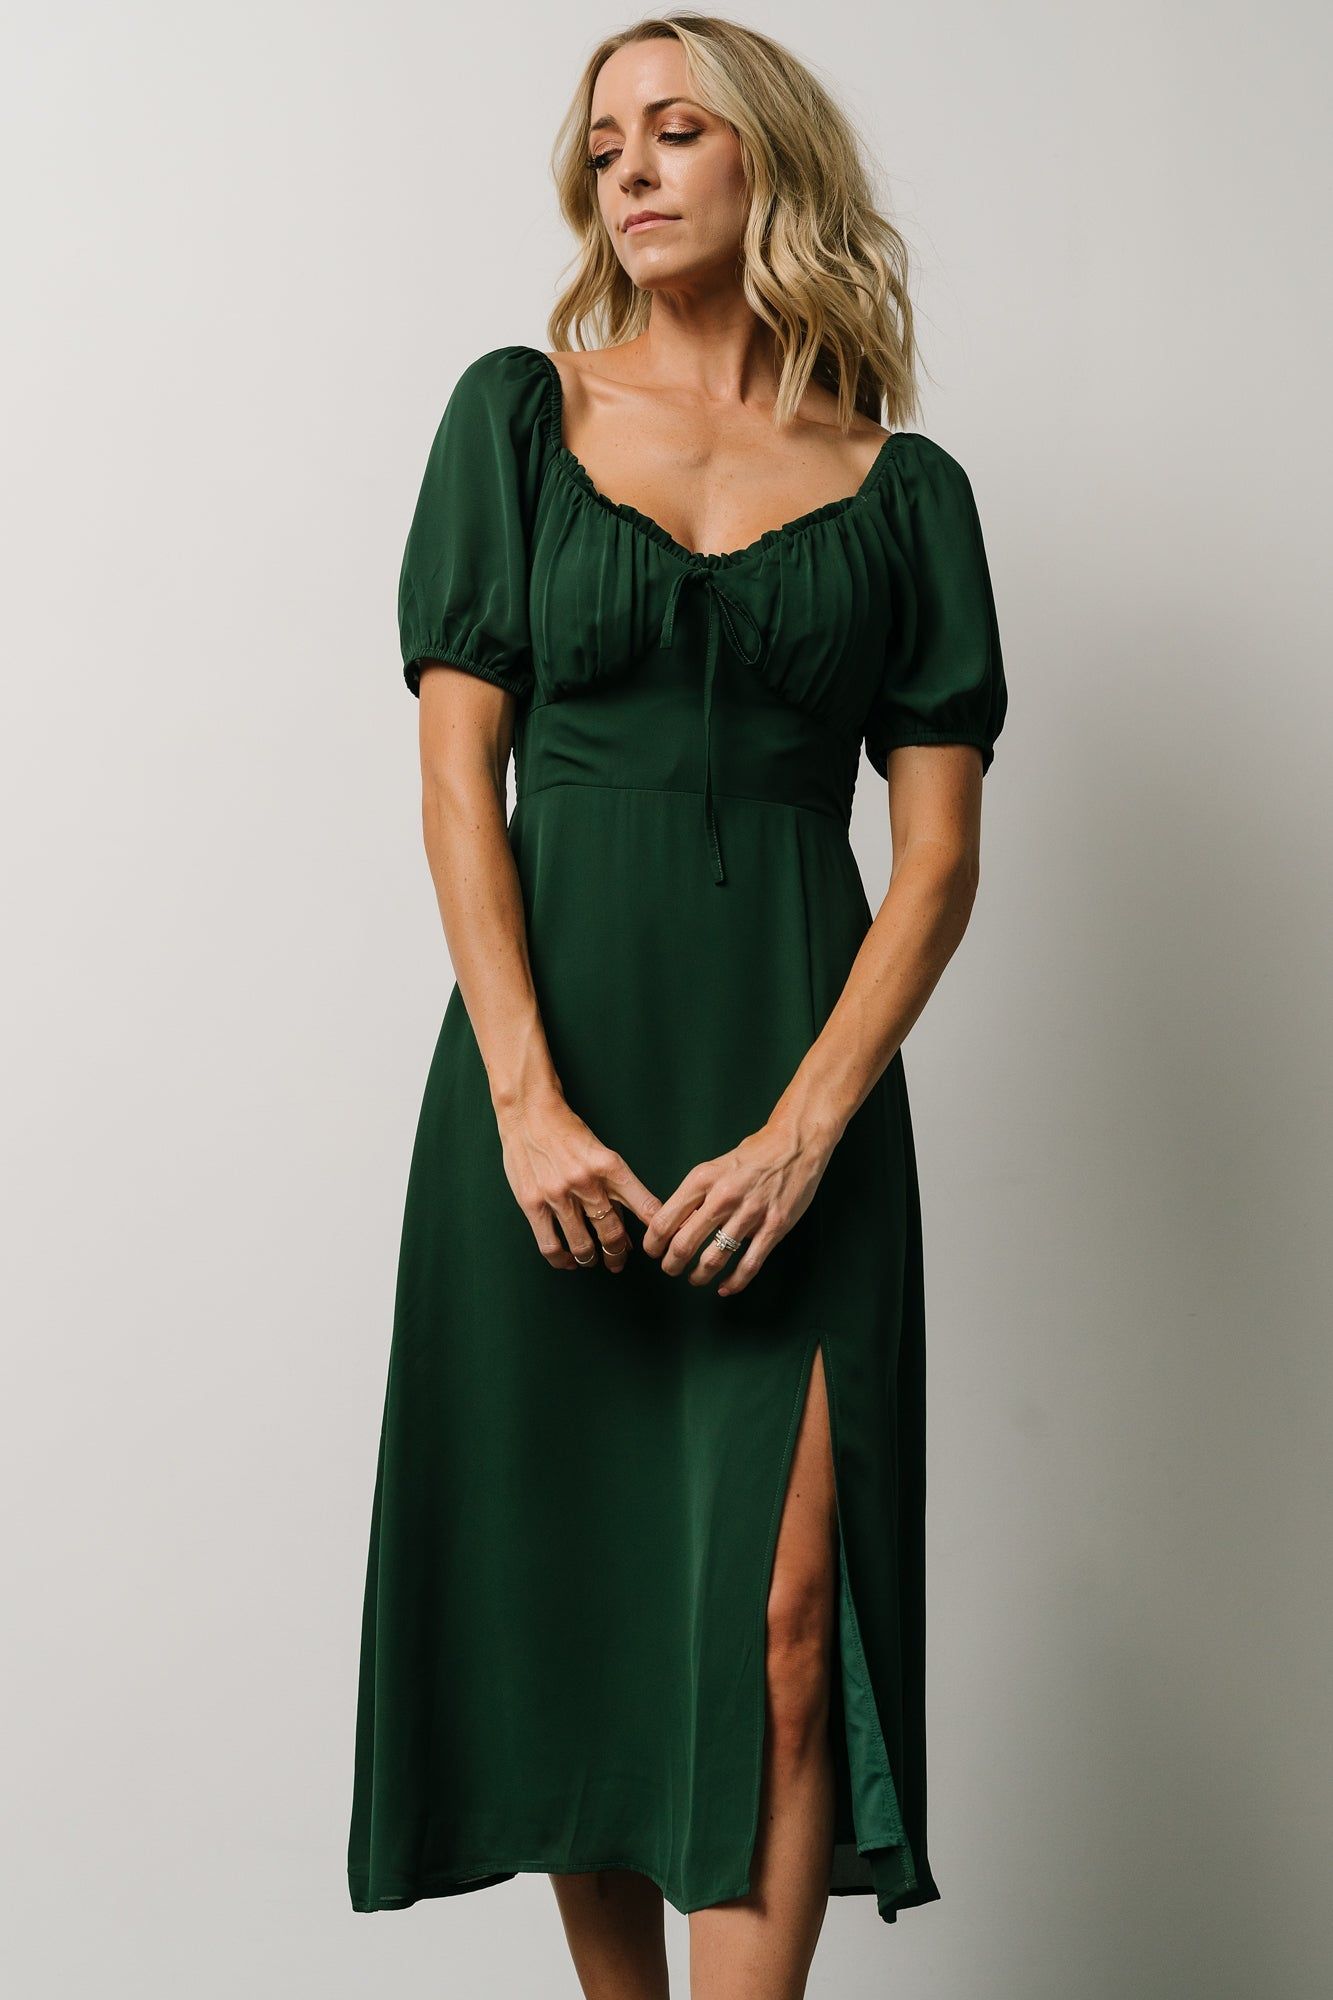 How to Wear Green Midi Dress: Best 13 Breezy & Refreshing Outfits for Ladies